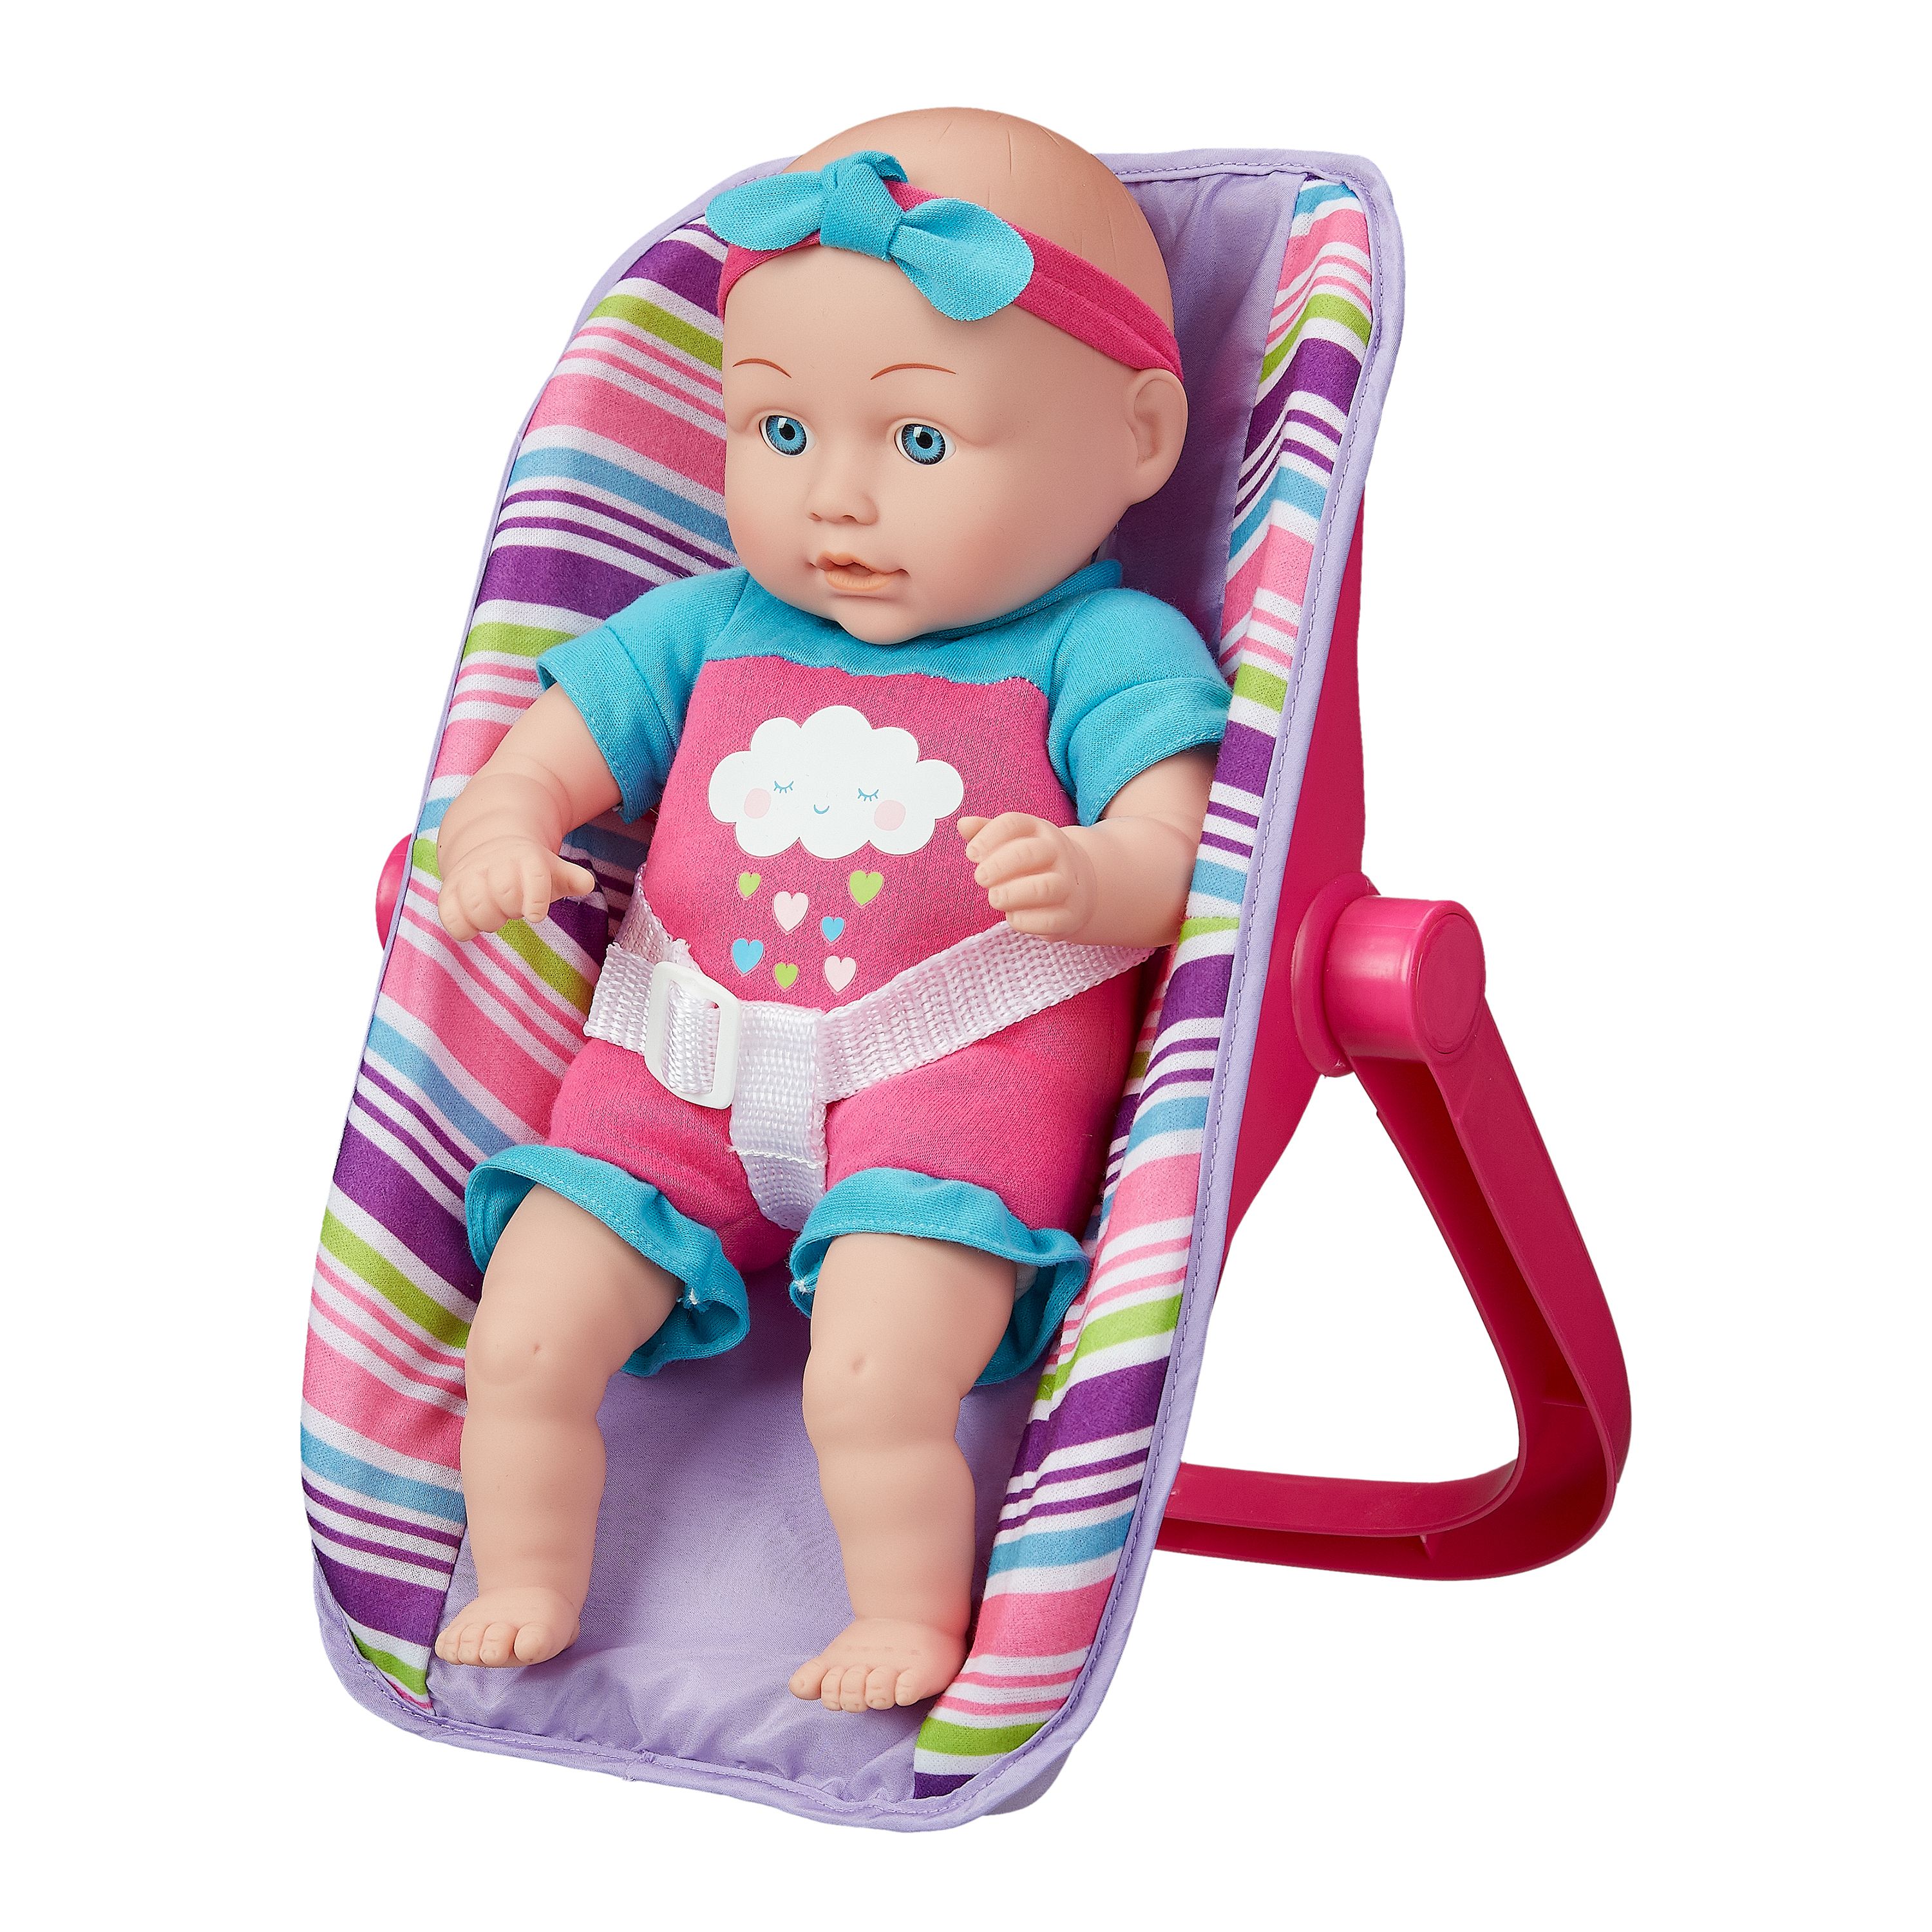 My Sweet Love 13" Baby with Carrier Play Set Doll Pink 4-Piece - image 1 of 4